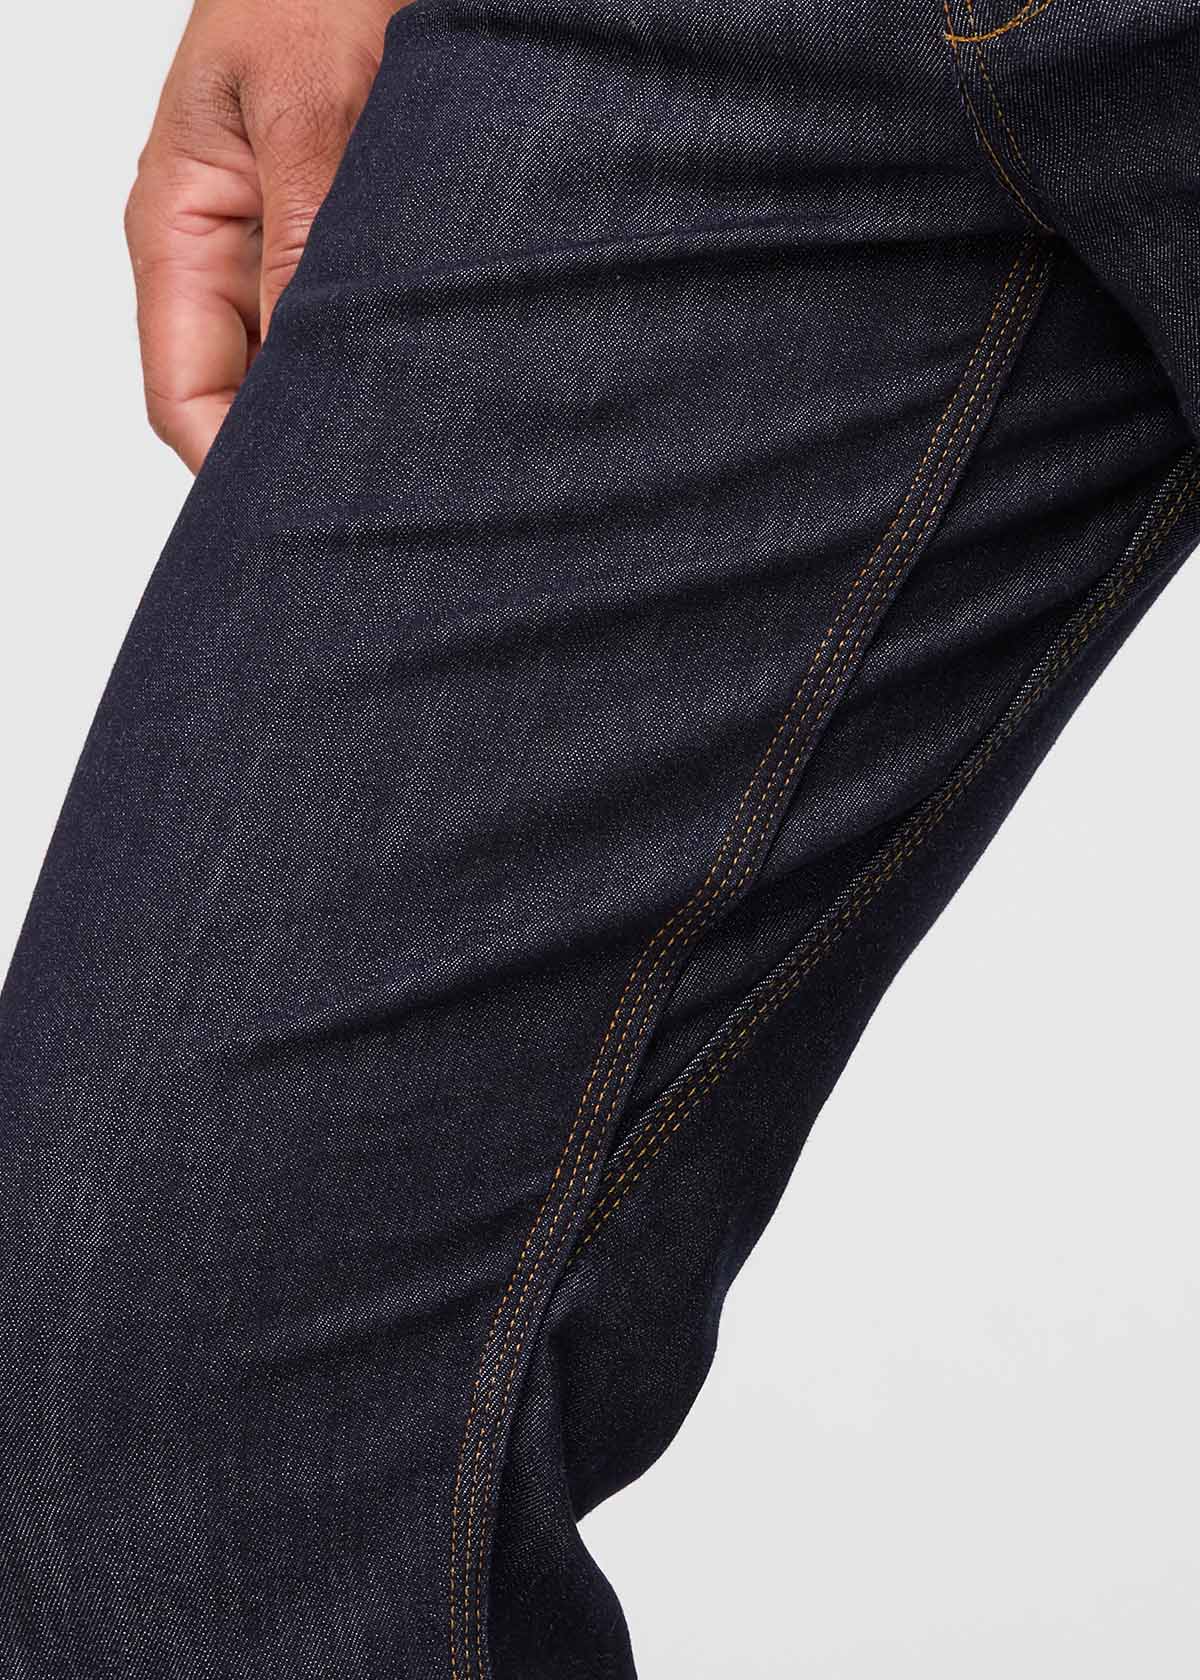 Men's Dark Blue Athletic Straight Fit Stretch Jeans